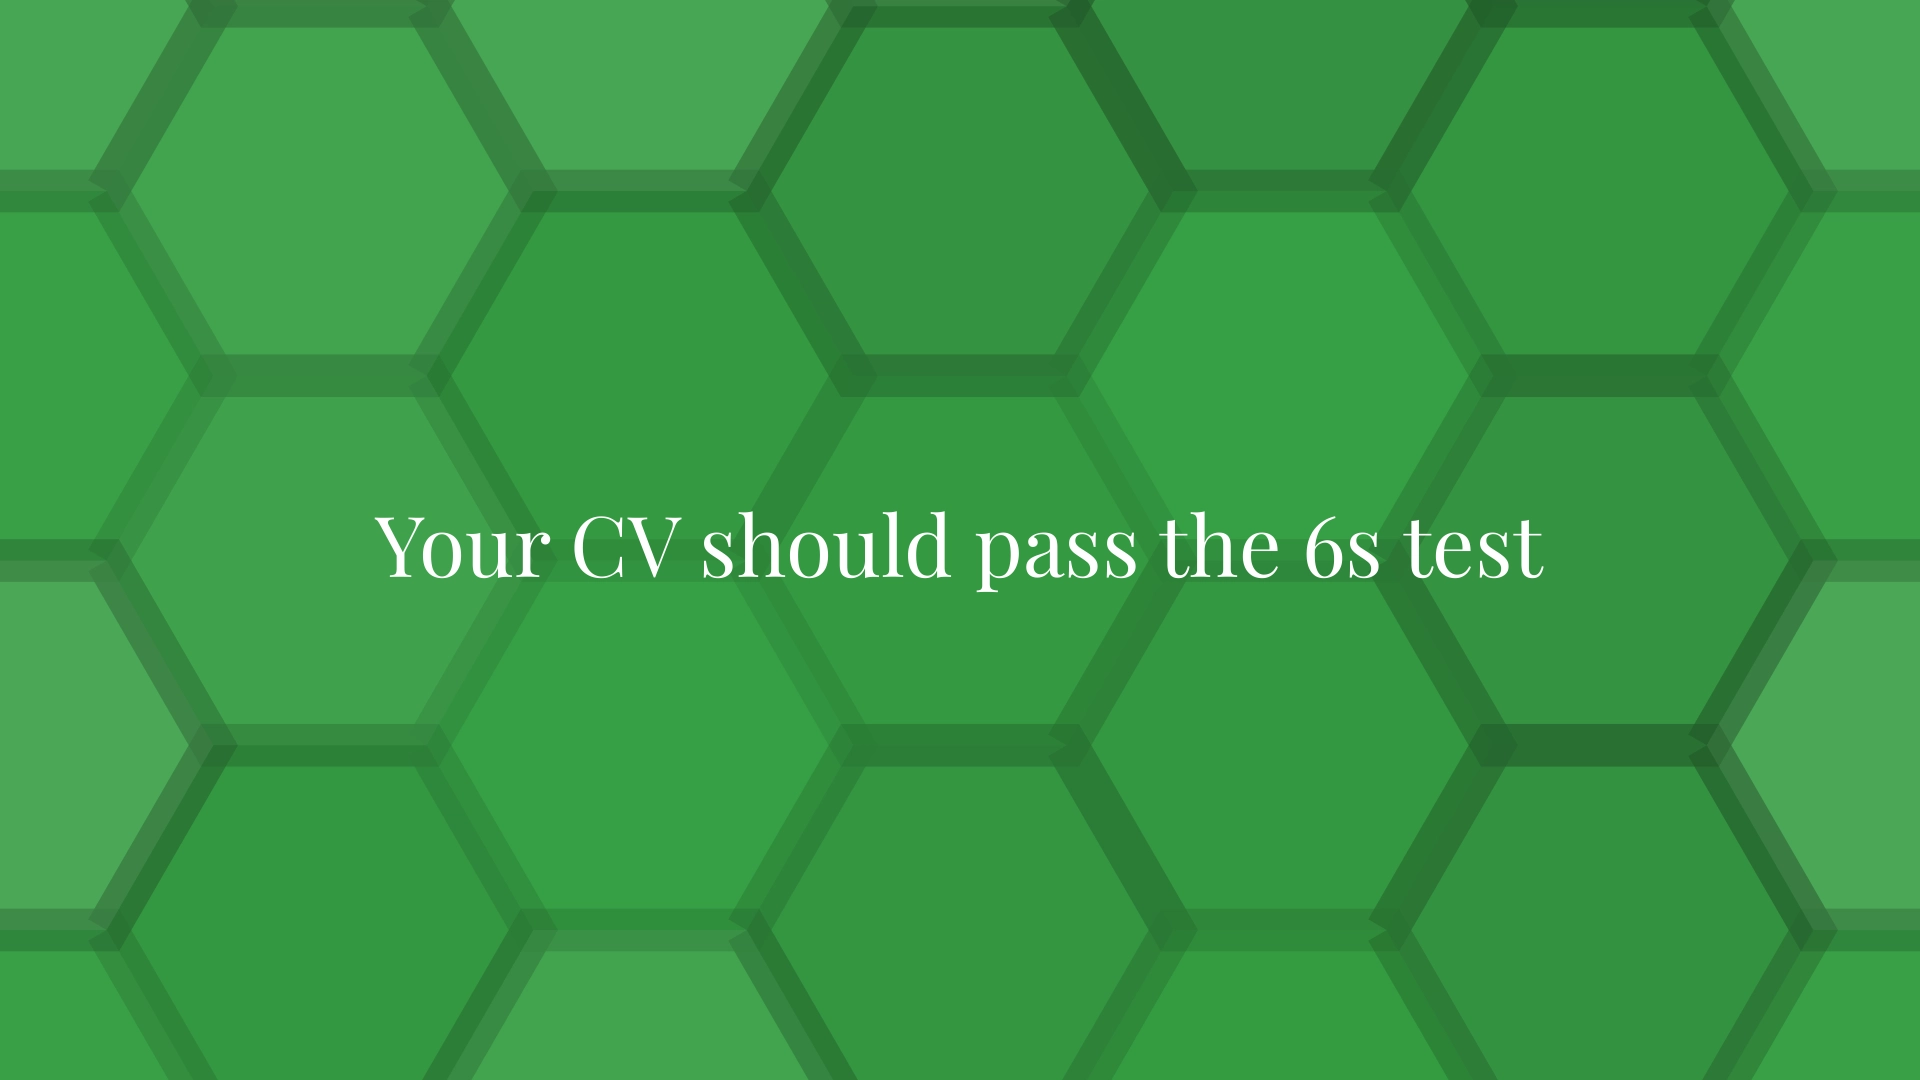 Your CV should pass the 6s test